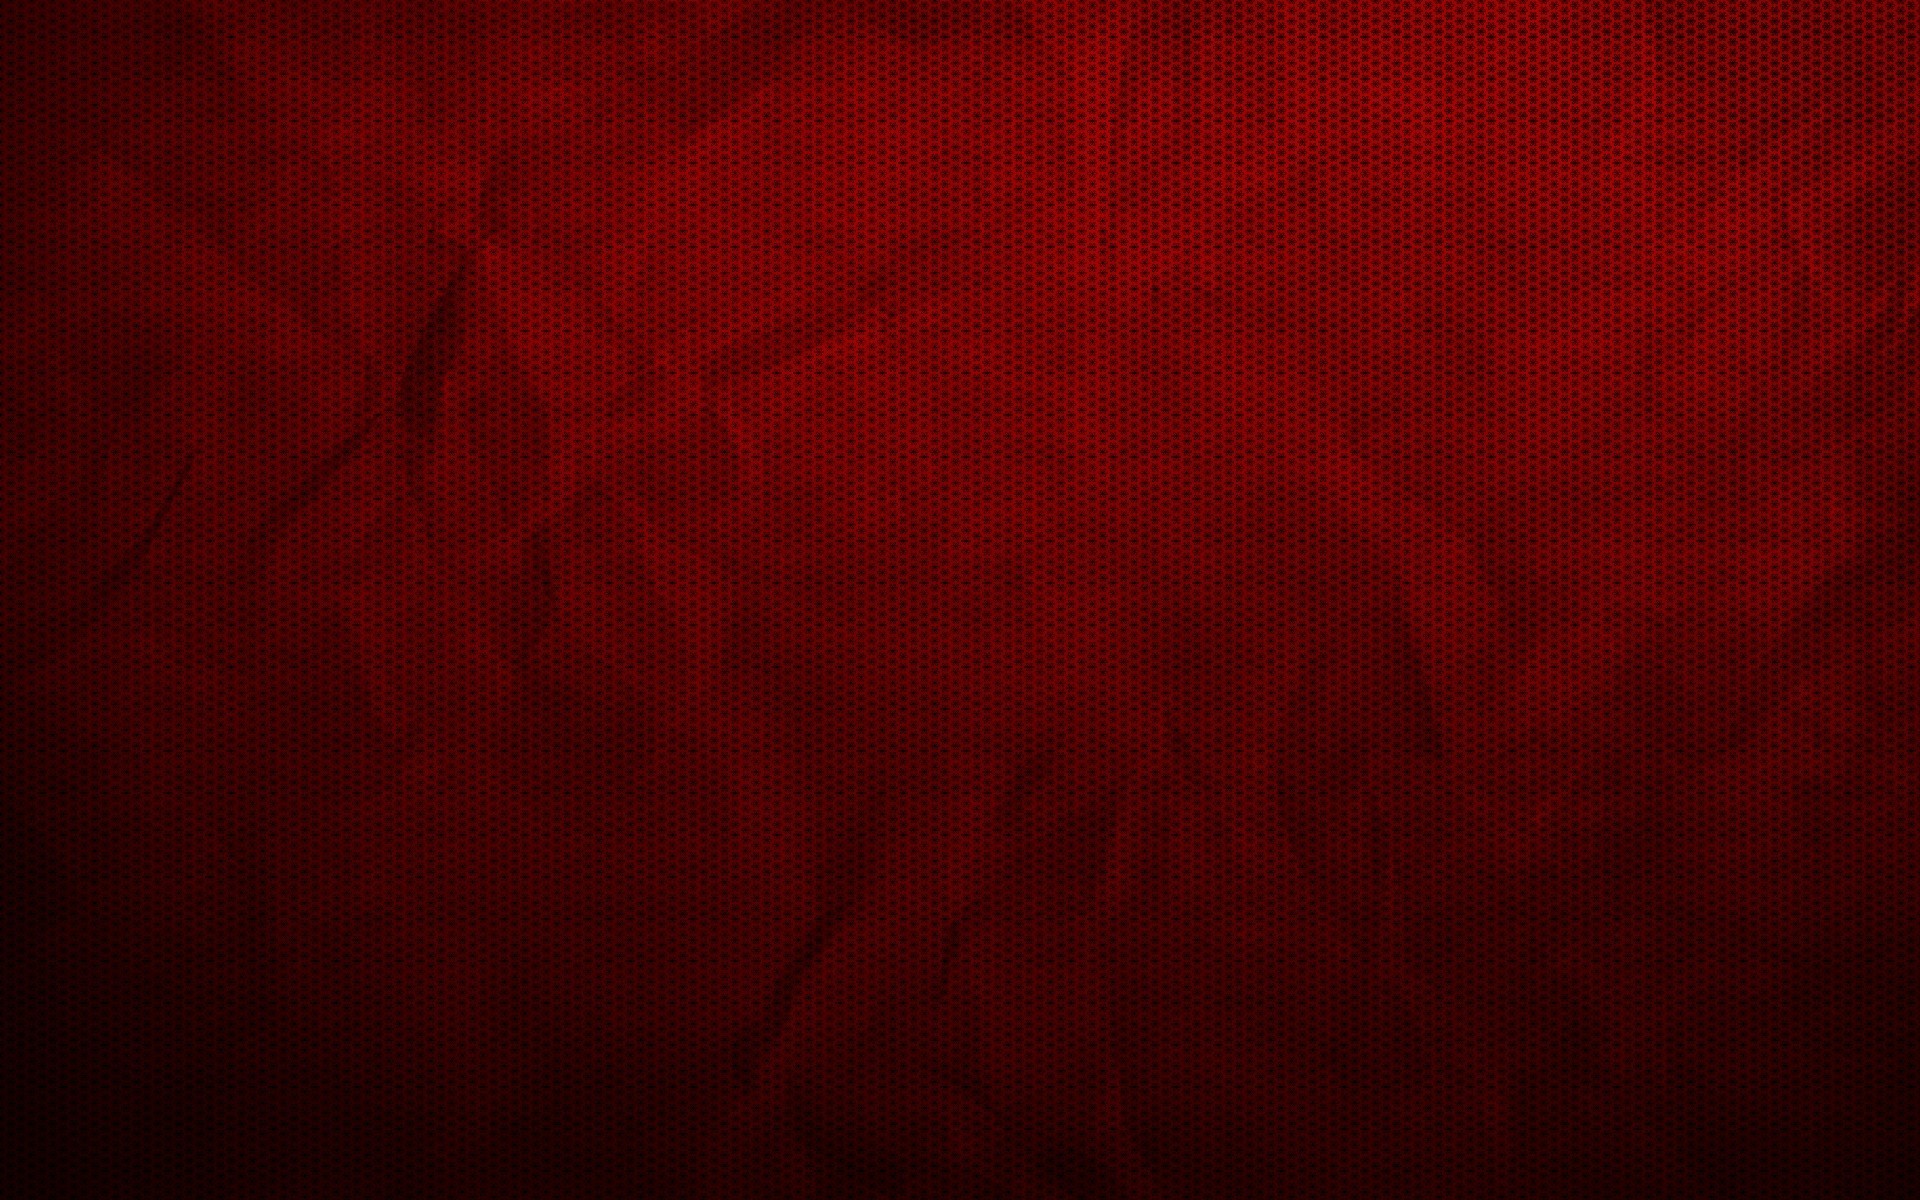 1920x1200 Marun dark red color plain background hd wallpapers gallery Black 